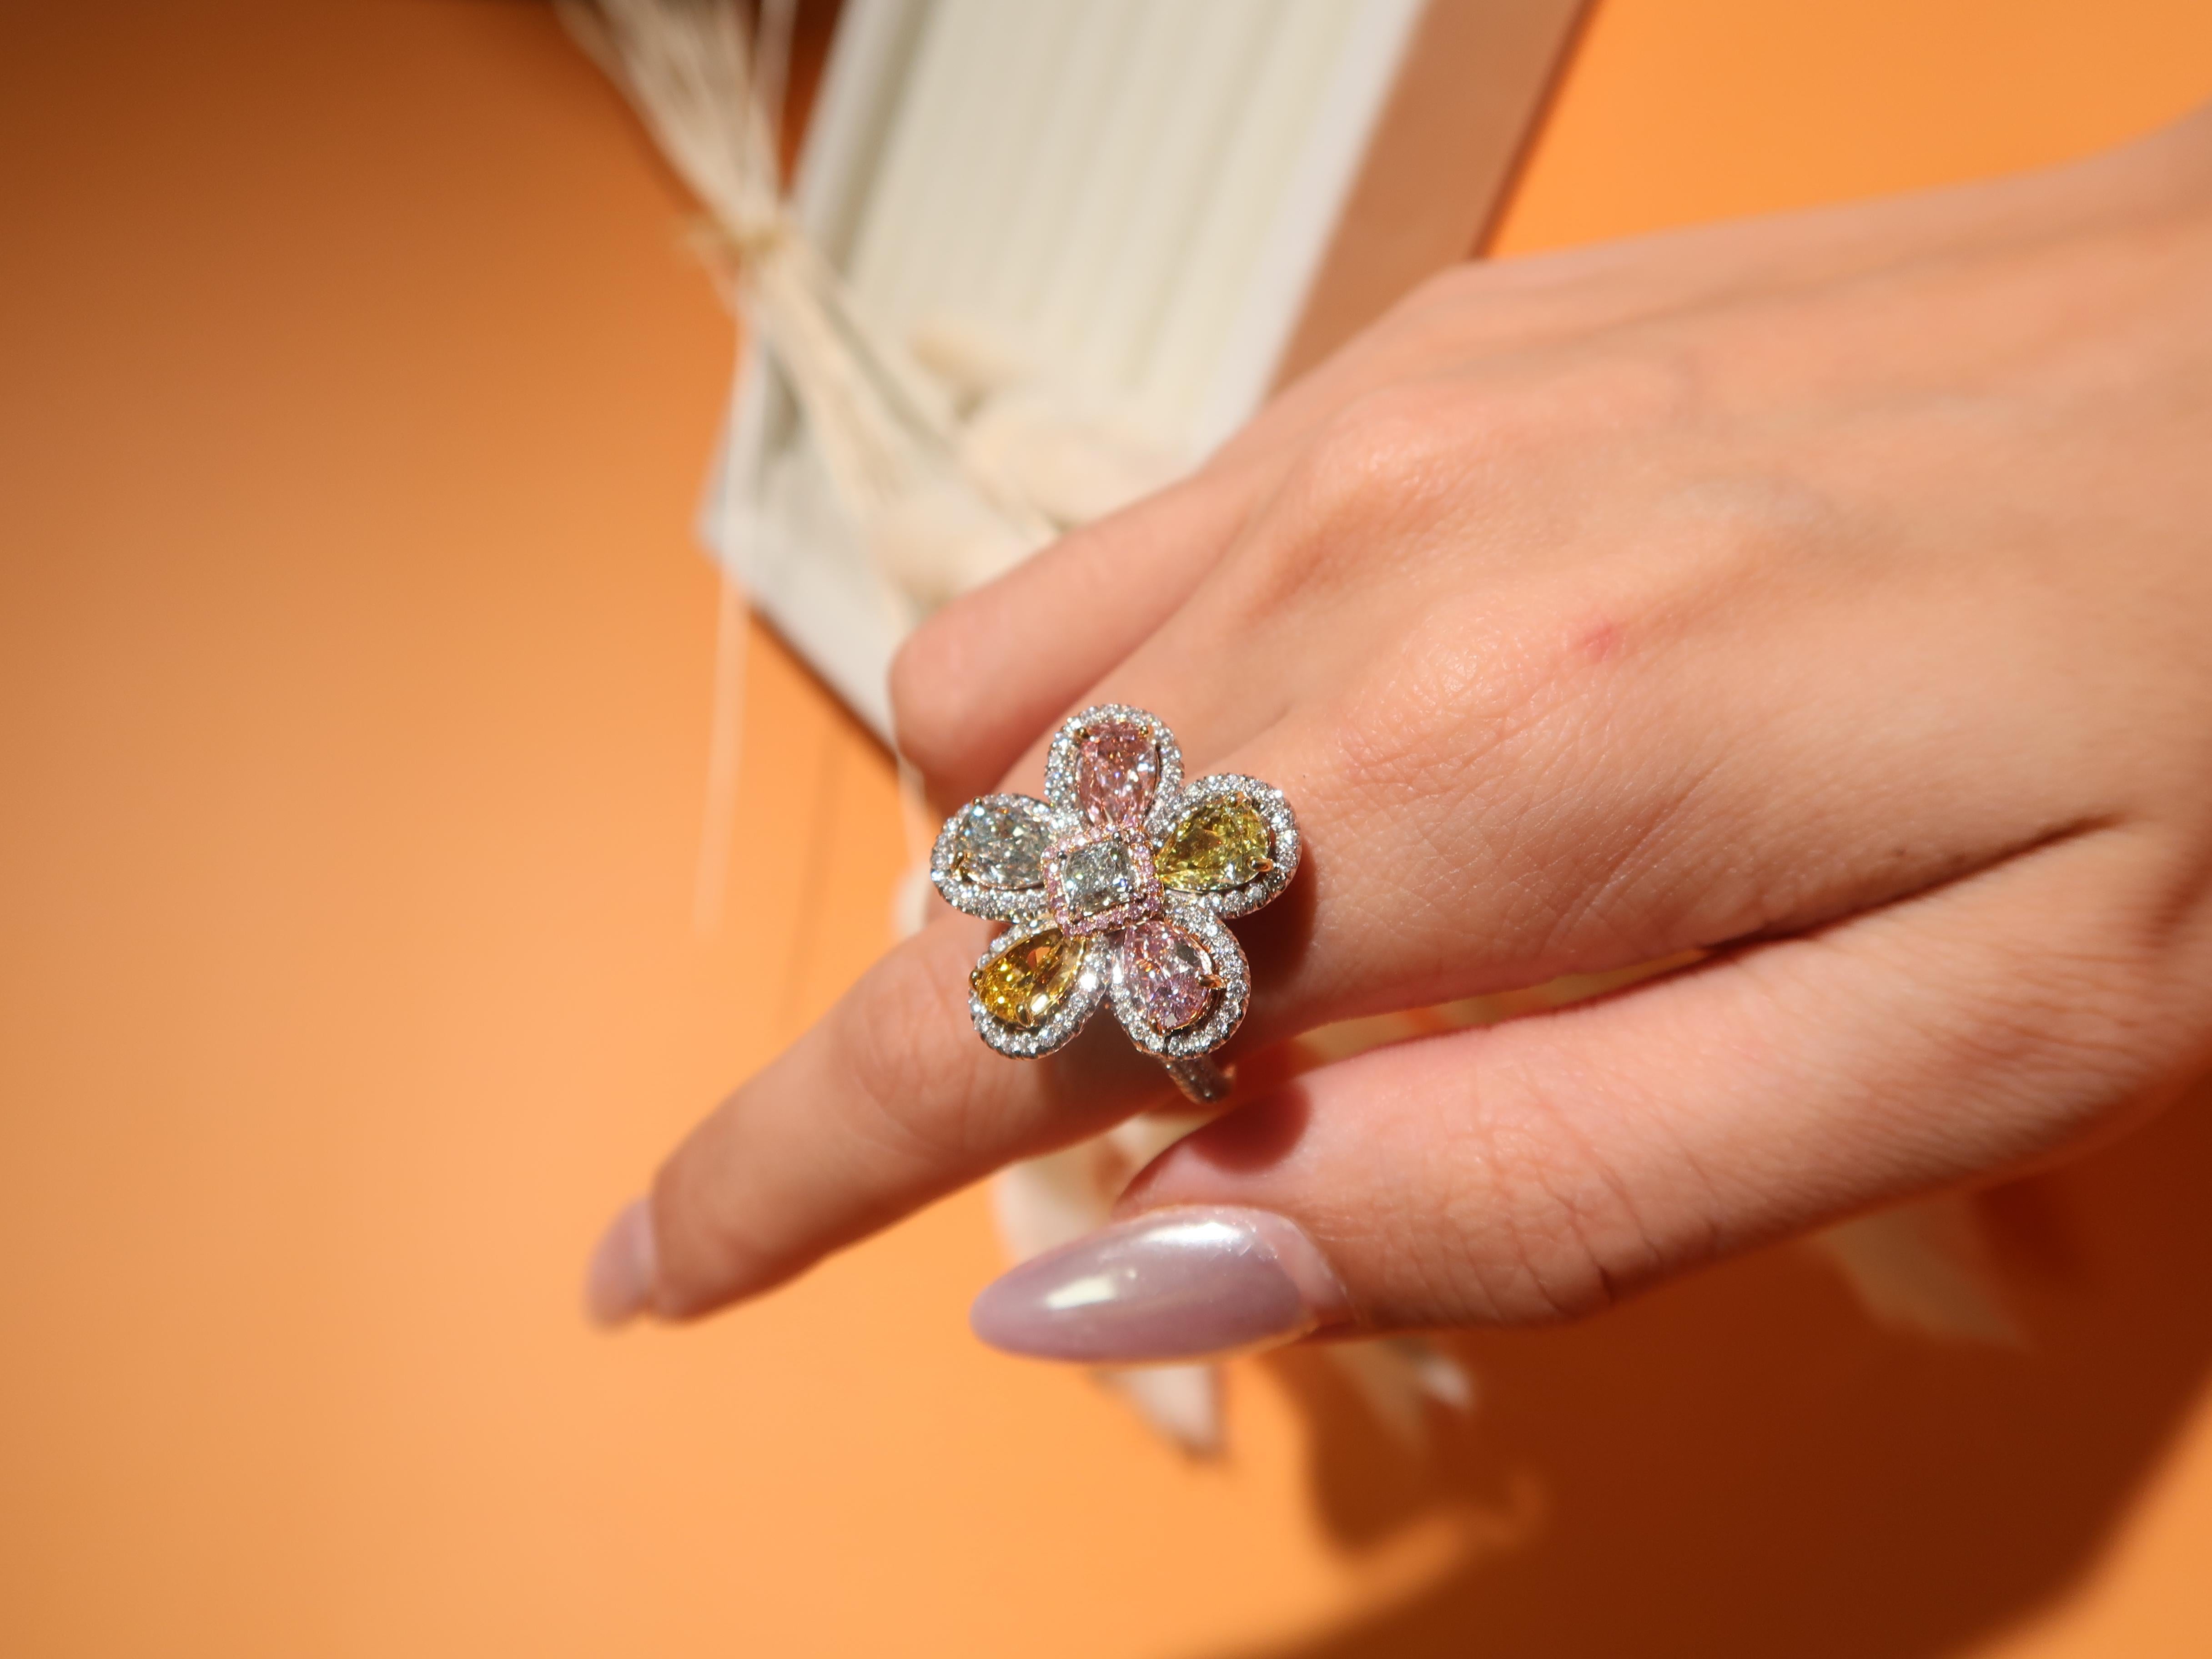 A multi-color floral diamond ring featuring a vibrant array of diamonds: a 0.36 carat green cushion-shaped diamond at its center, surrounded by 20 round-shaped pink diamonds weighing 0.06 carat. this ring include a 0.56 carat pear-shaped fancy